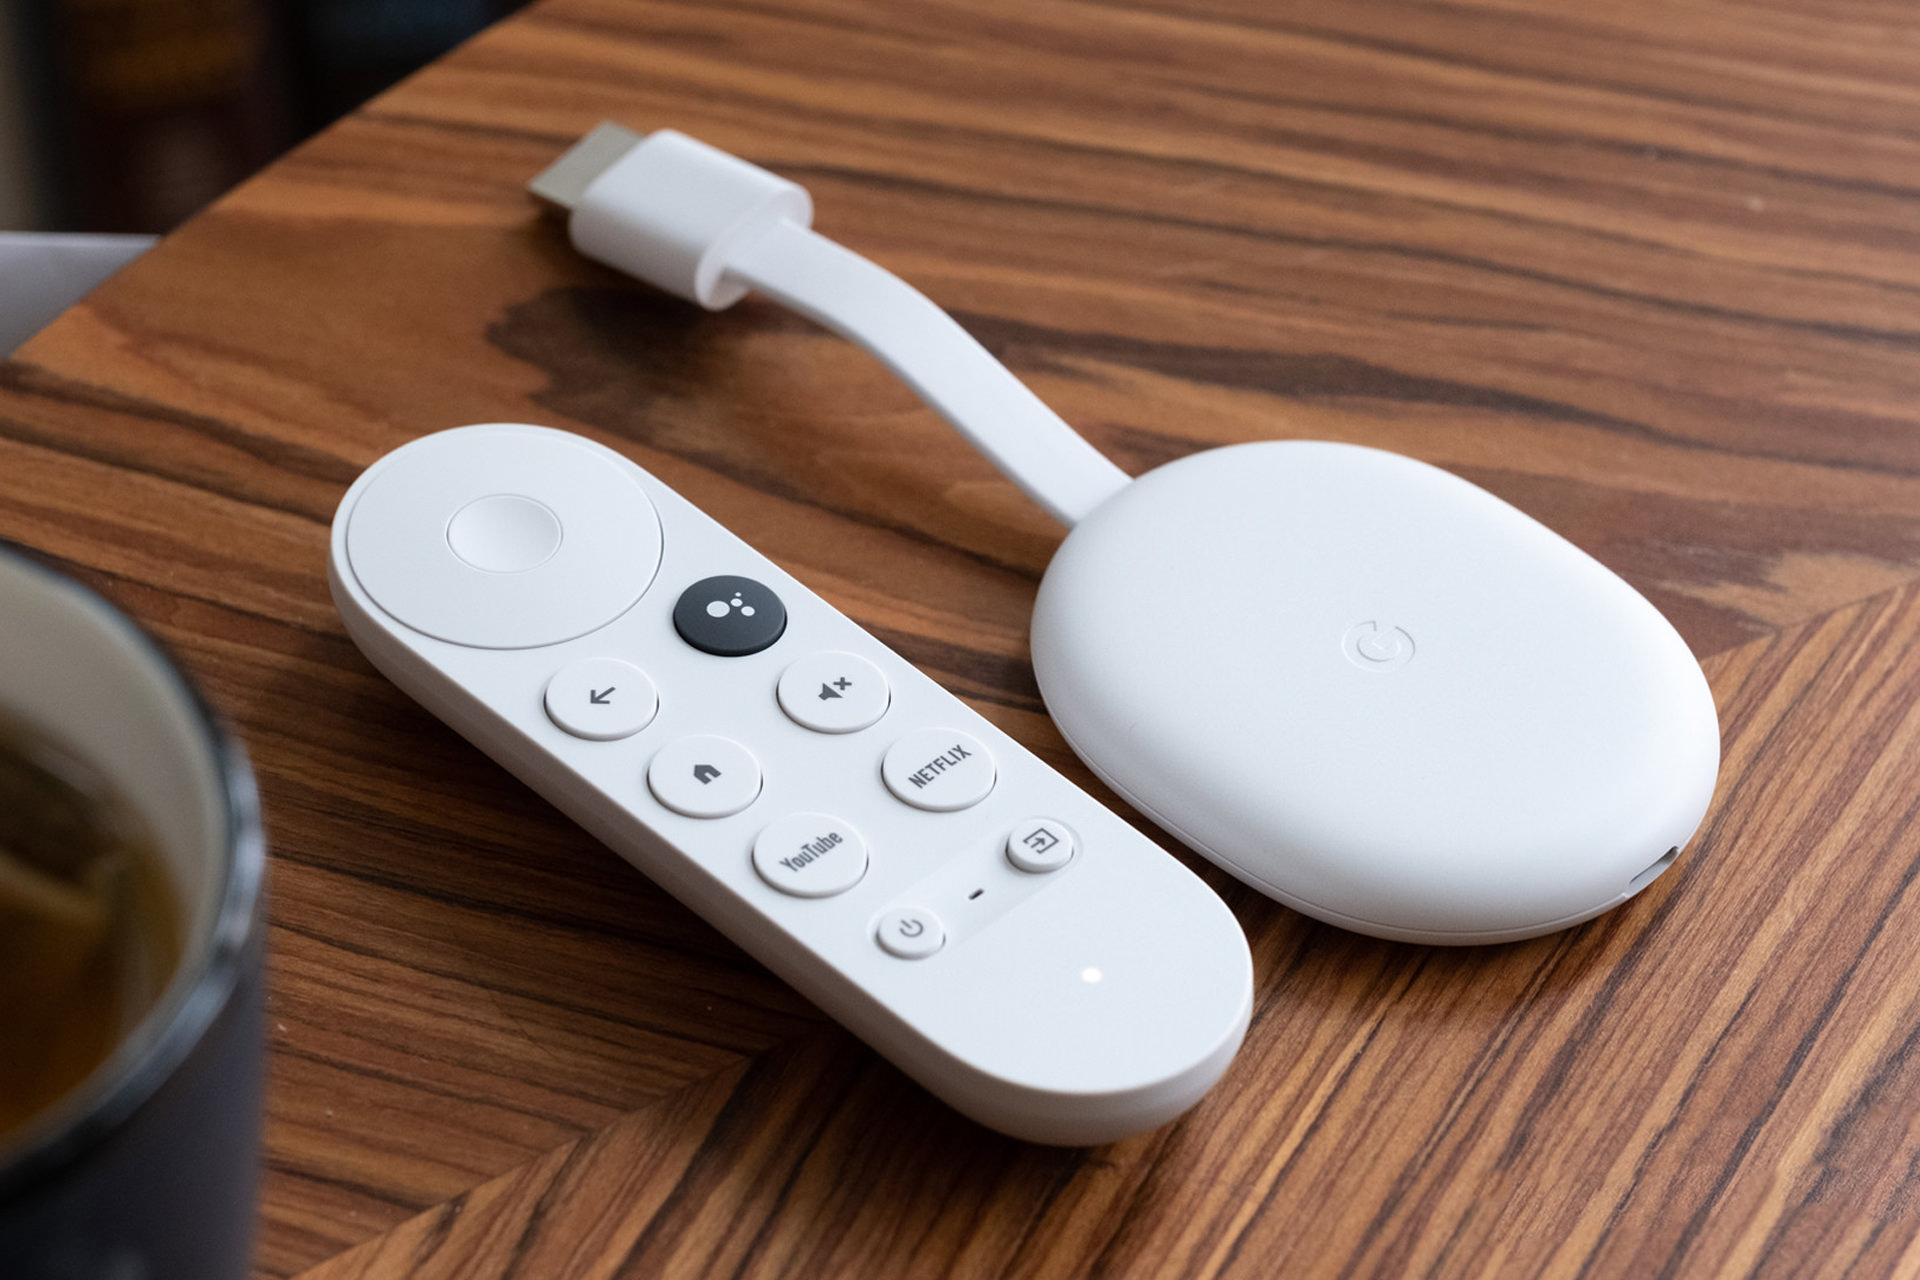 2021 3 google 2020 chromecast streaming dongle with controller on table 638c67568615ae71282af351